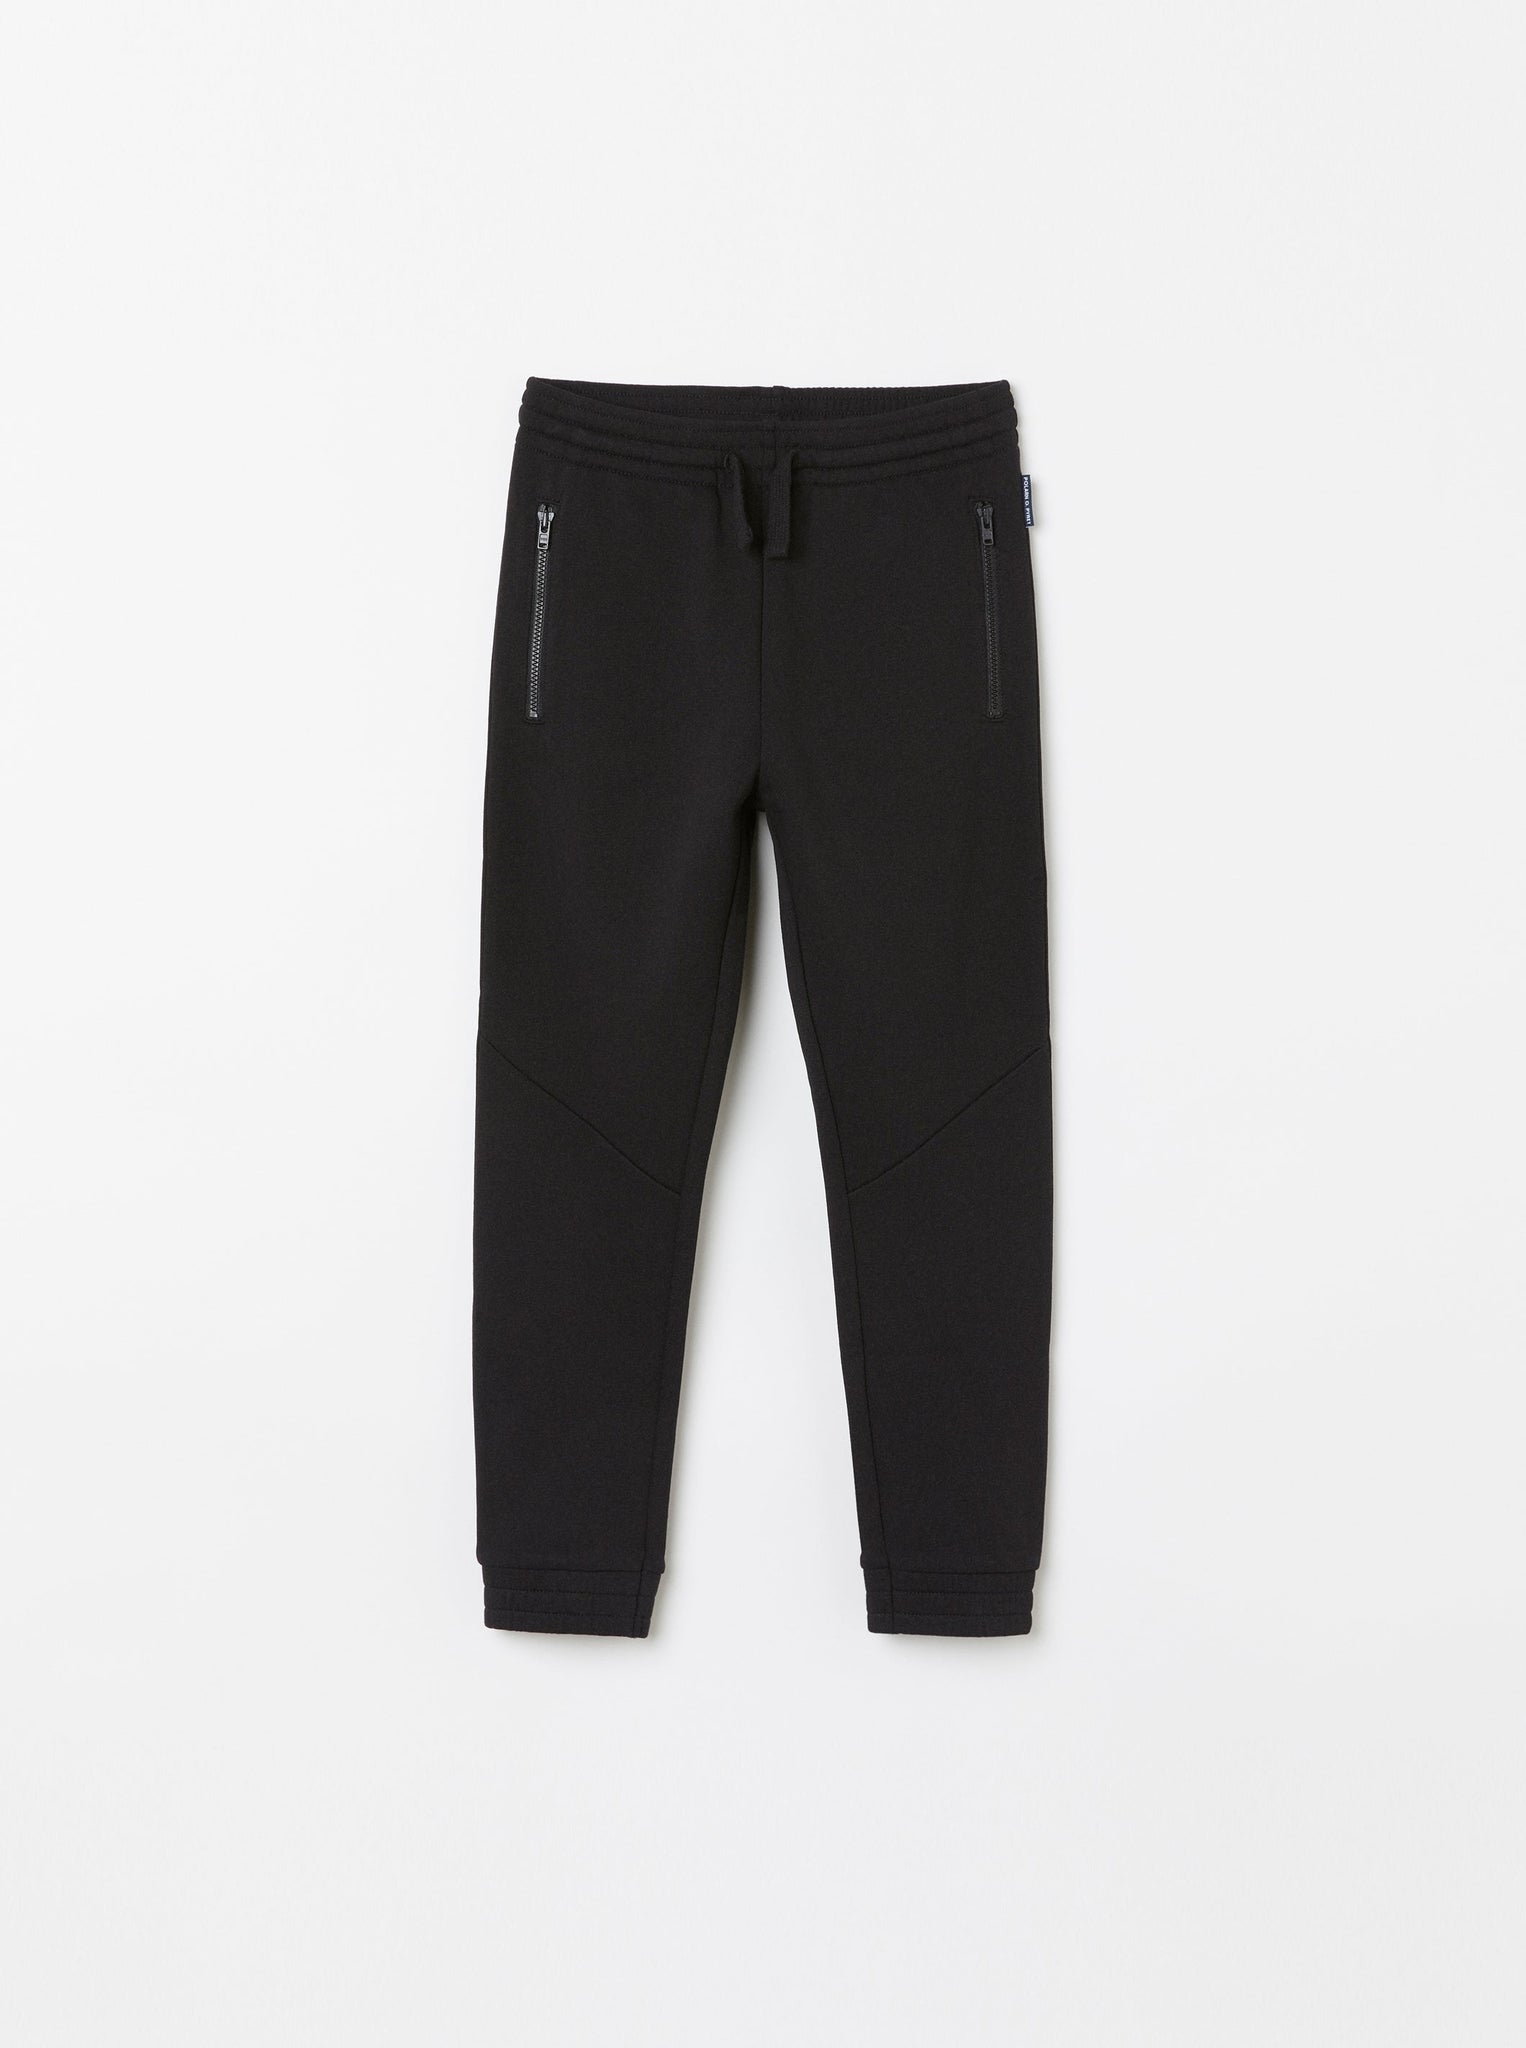 Organic Cotton Black Kids Joggers from the Polarn O. Pyret Kidswear collection. Ethically produced kids clothing.